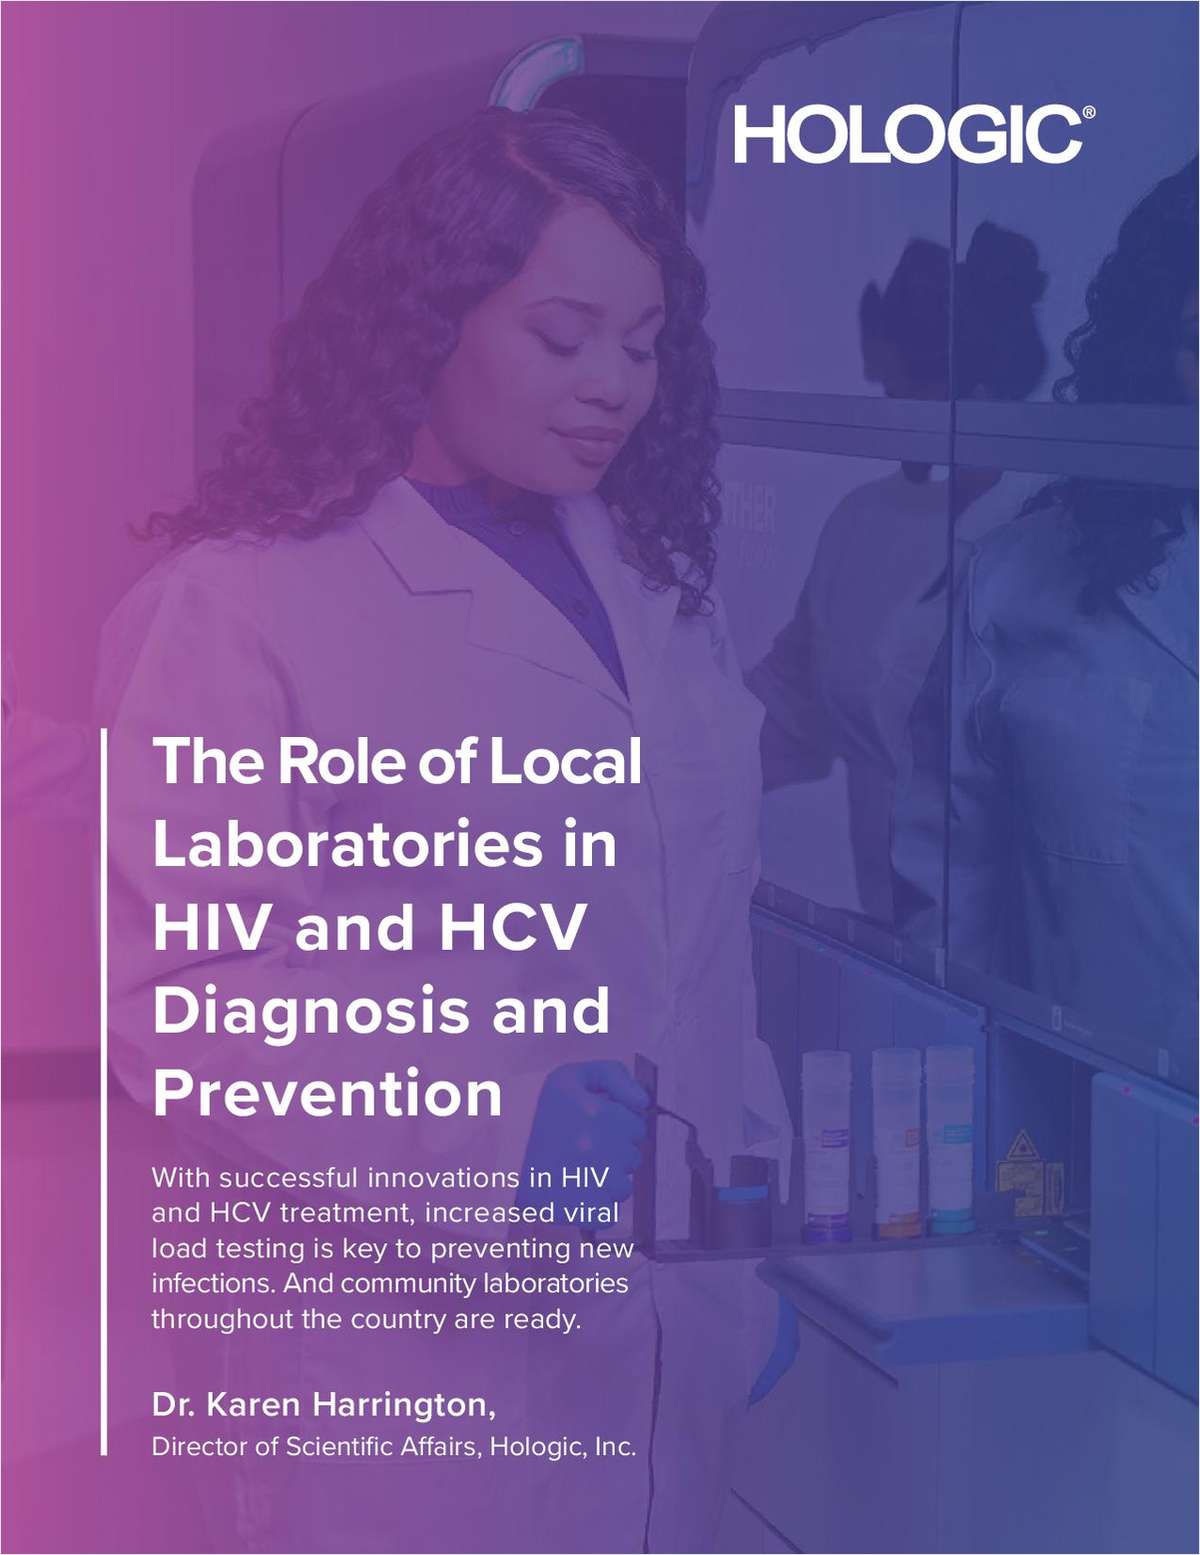 The Role of Local Laboratories in HIV and HCV Diagnosis and Prevention